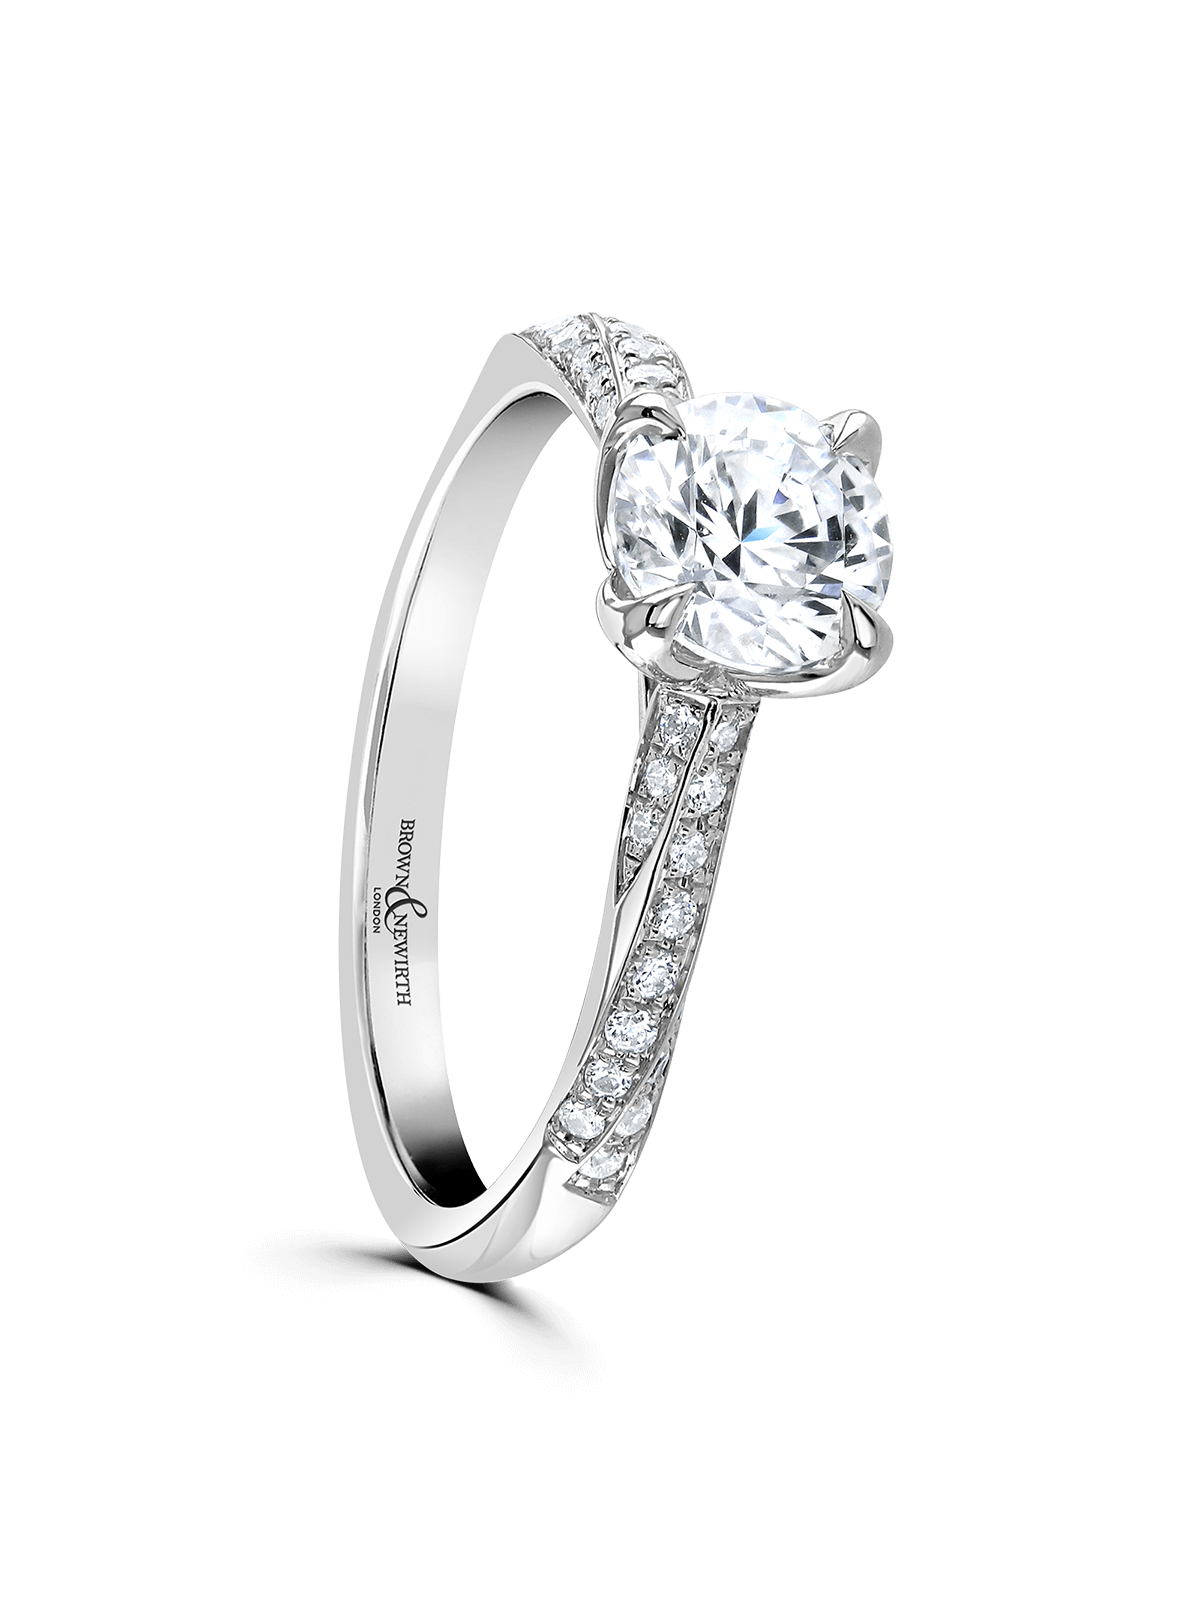 Brown & Newirth Azalea 0.70ct Brilliant Cut Certificated Diamond Solitaire Engagement Ring in Platinum with Diamond Set Shoulders